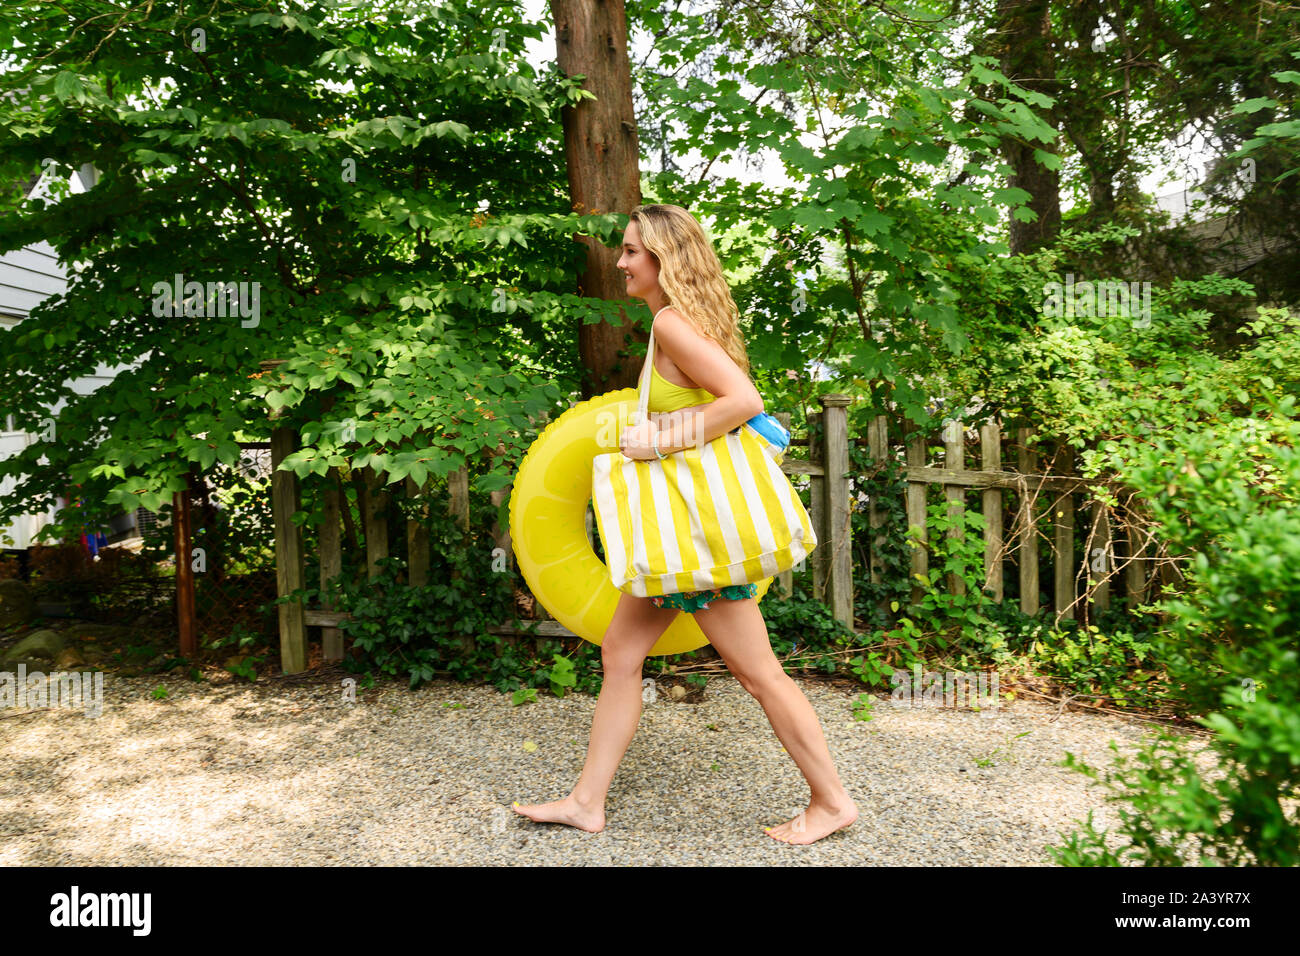 Young woman carrying yellow inflatable and bag Stock Photo